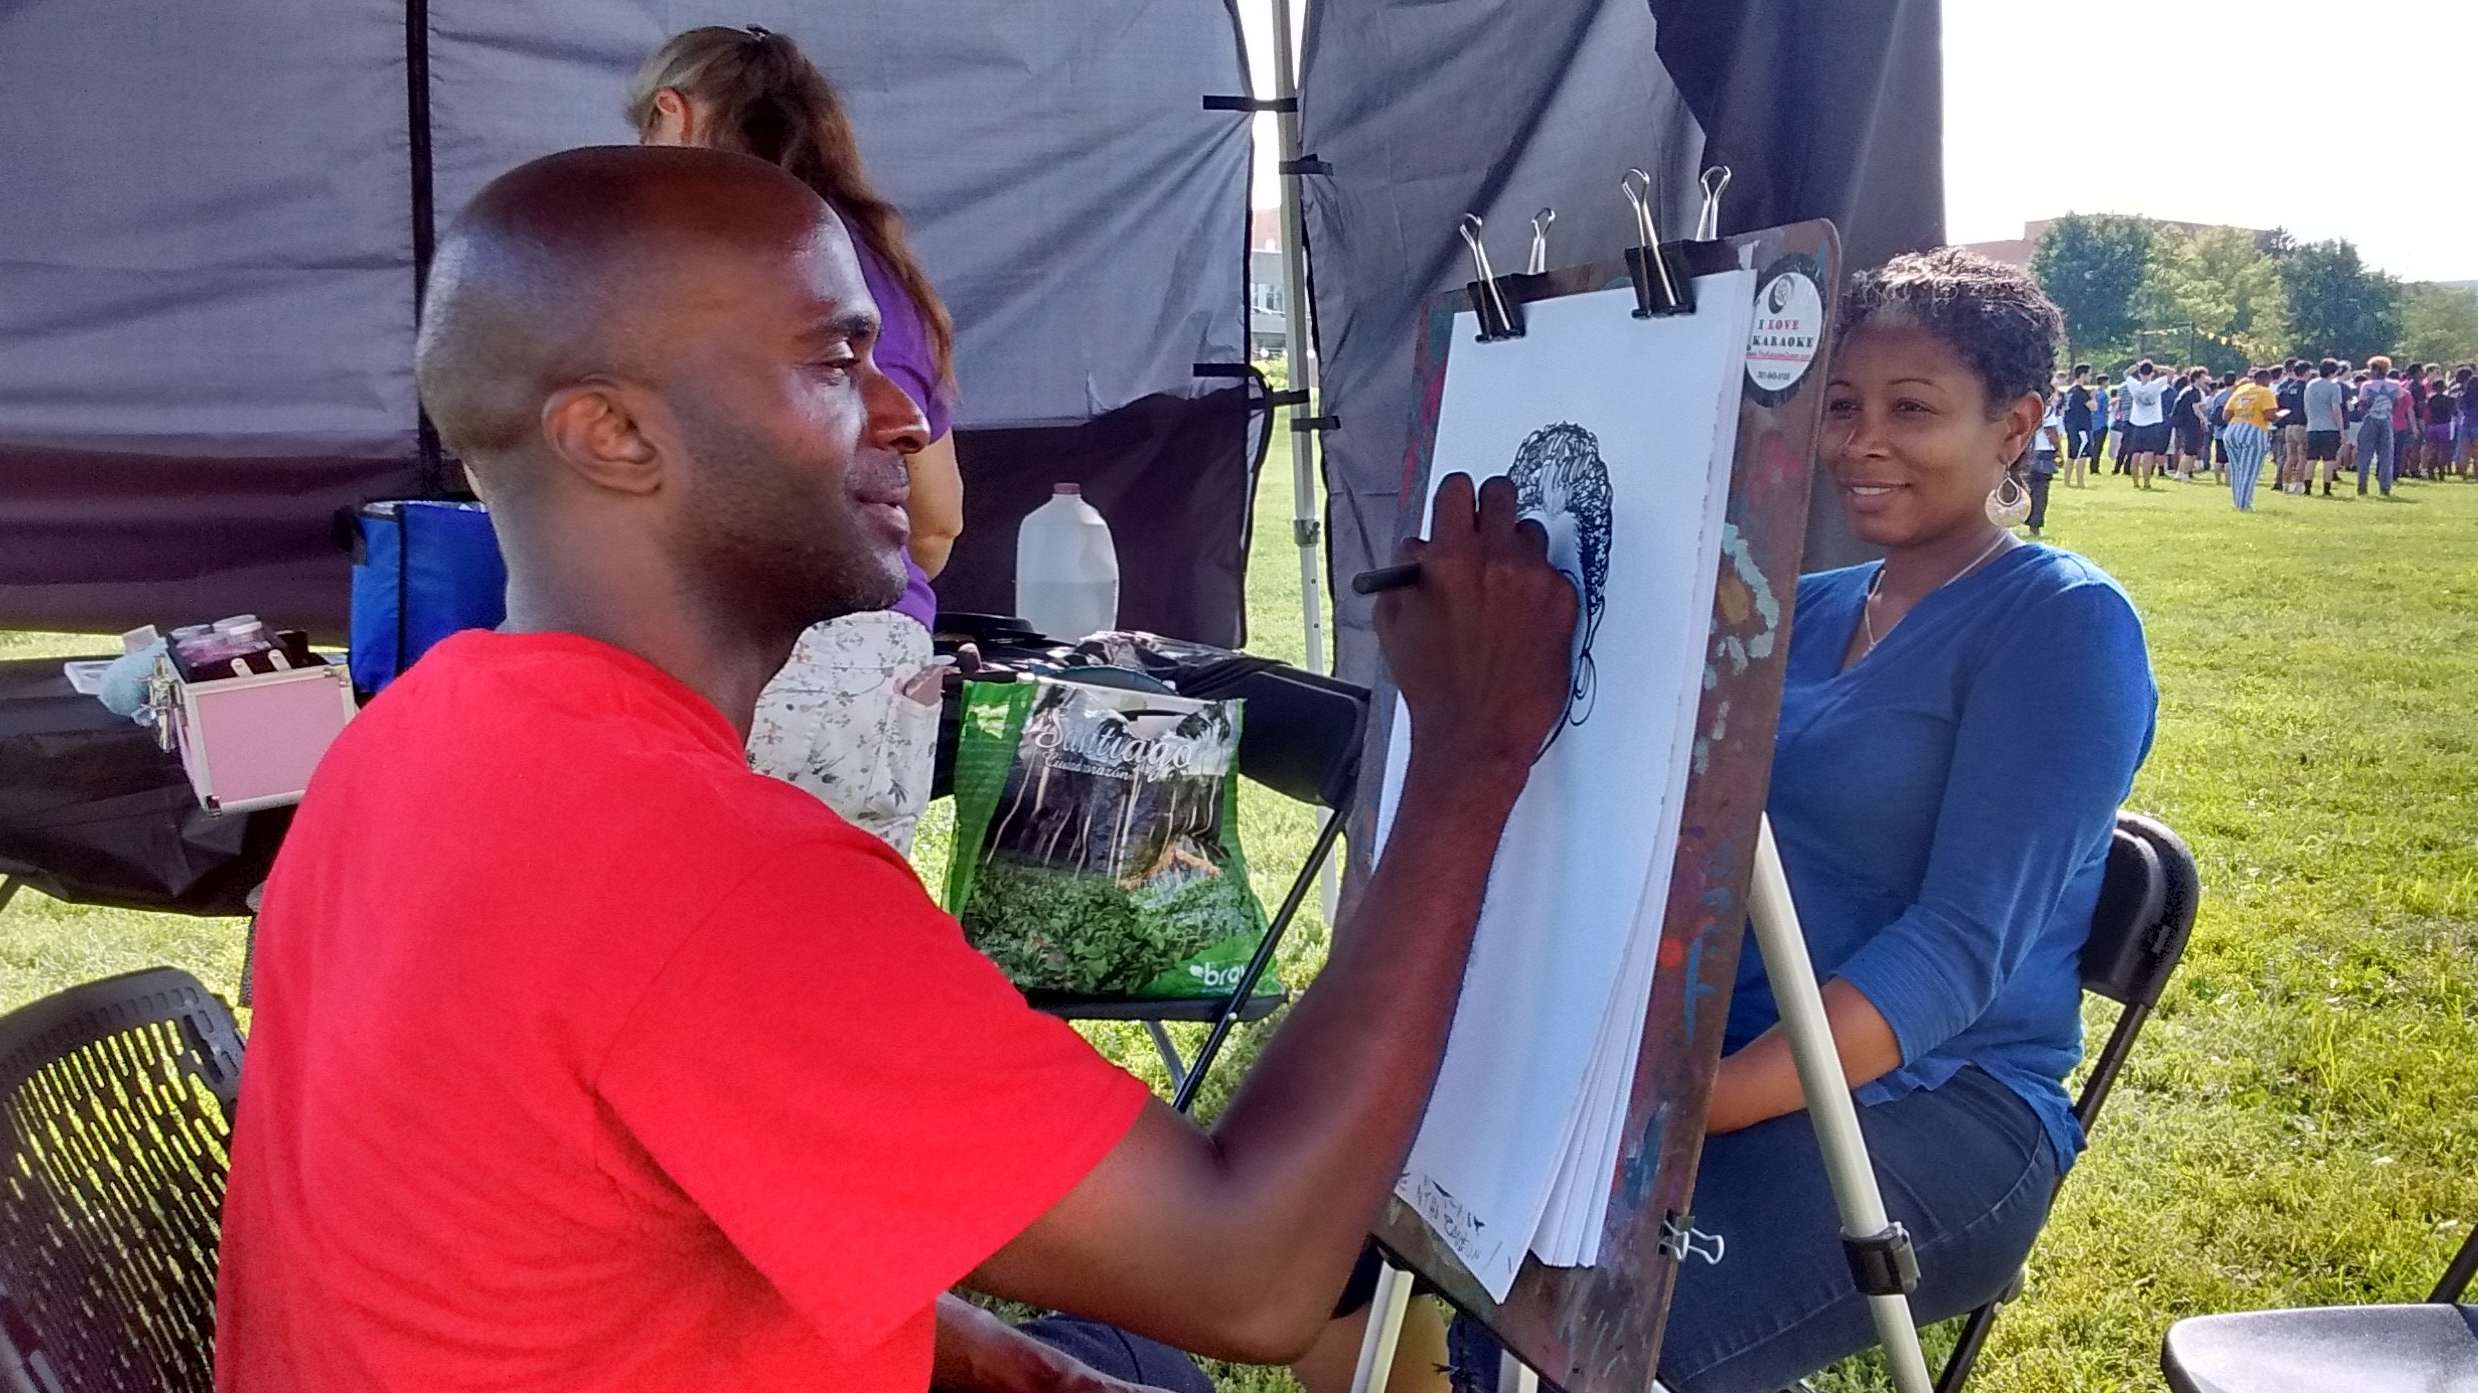 Let our caricature artists bring the fun to your next event!